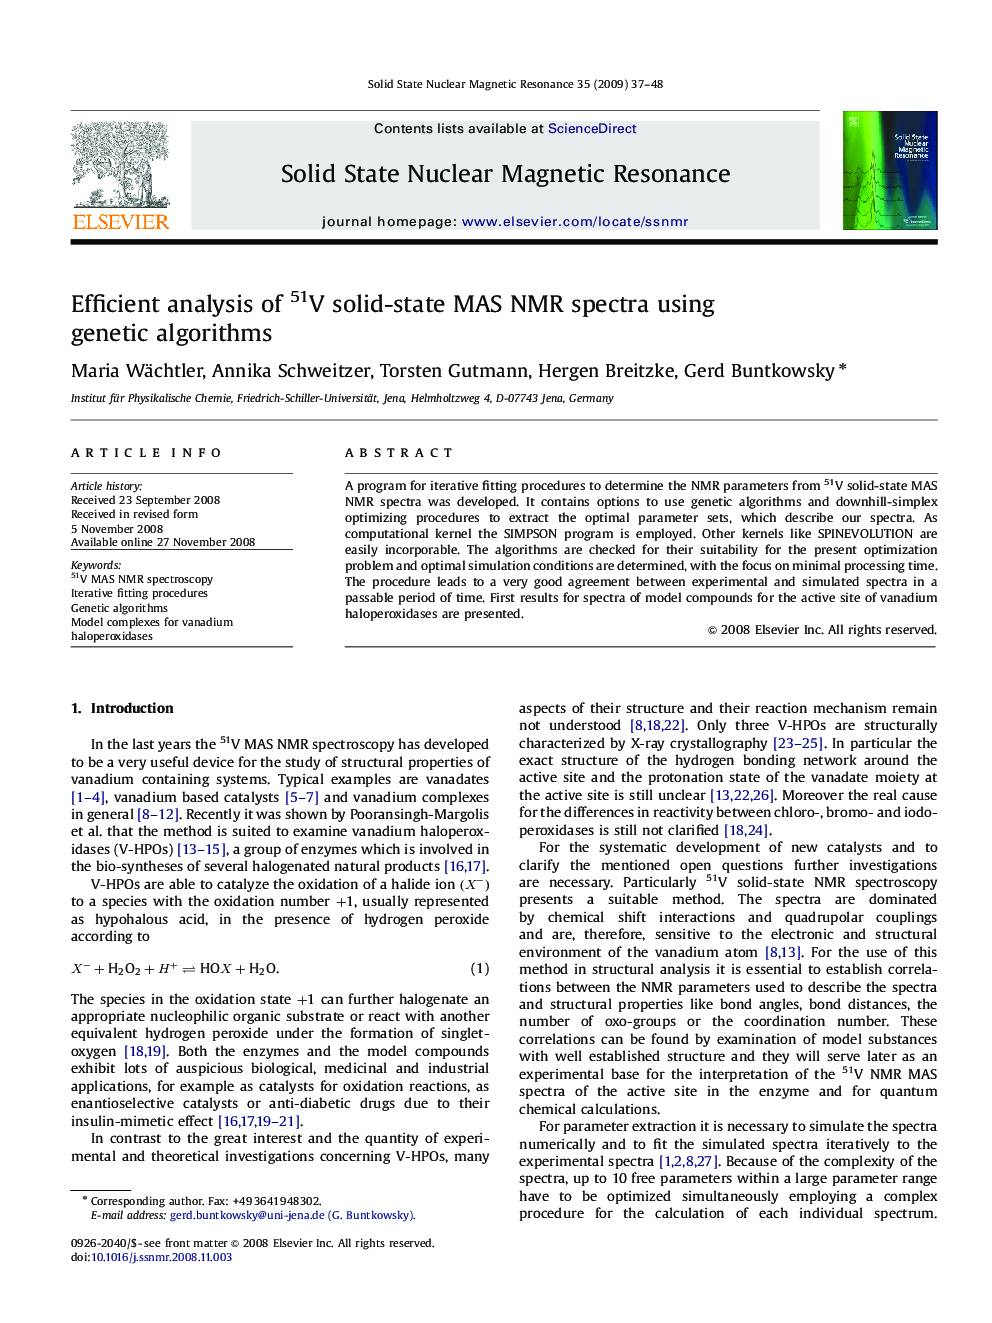 Efficient analysis of 51V solid-state MAS NMR spectra using genetic algorithms